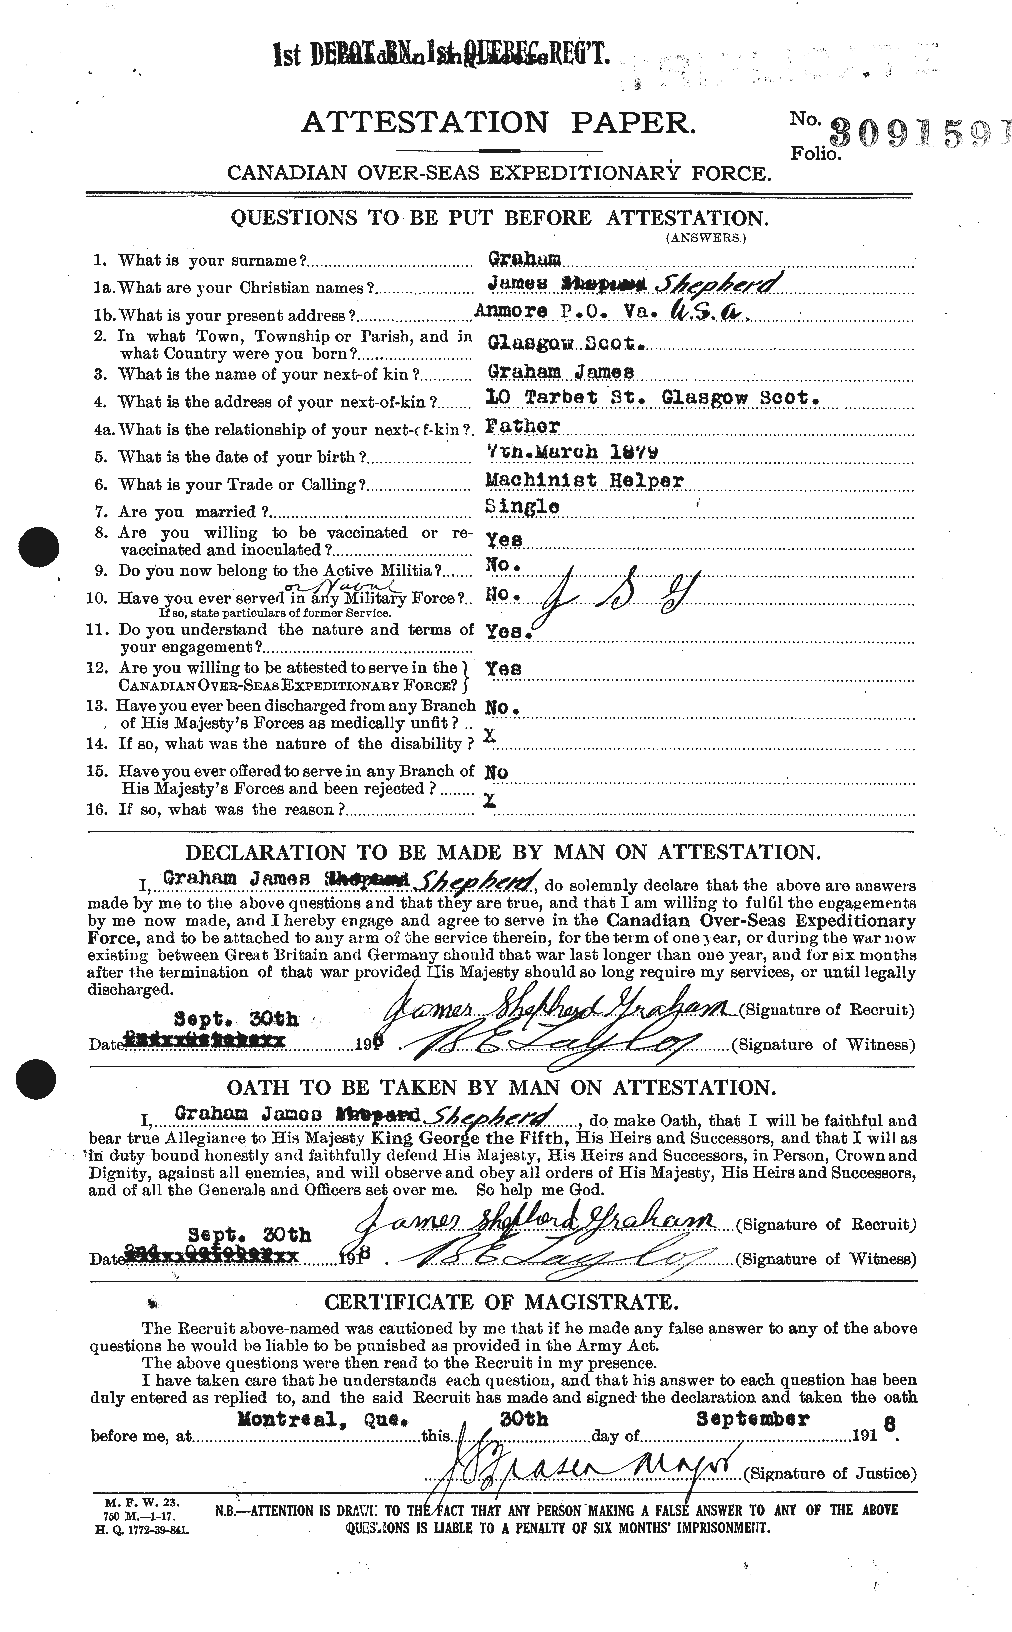 Personnel Records of the First World War - CEF 359097a